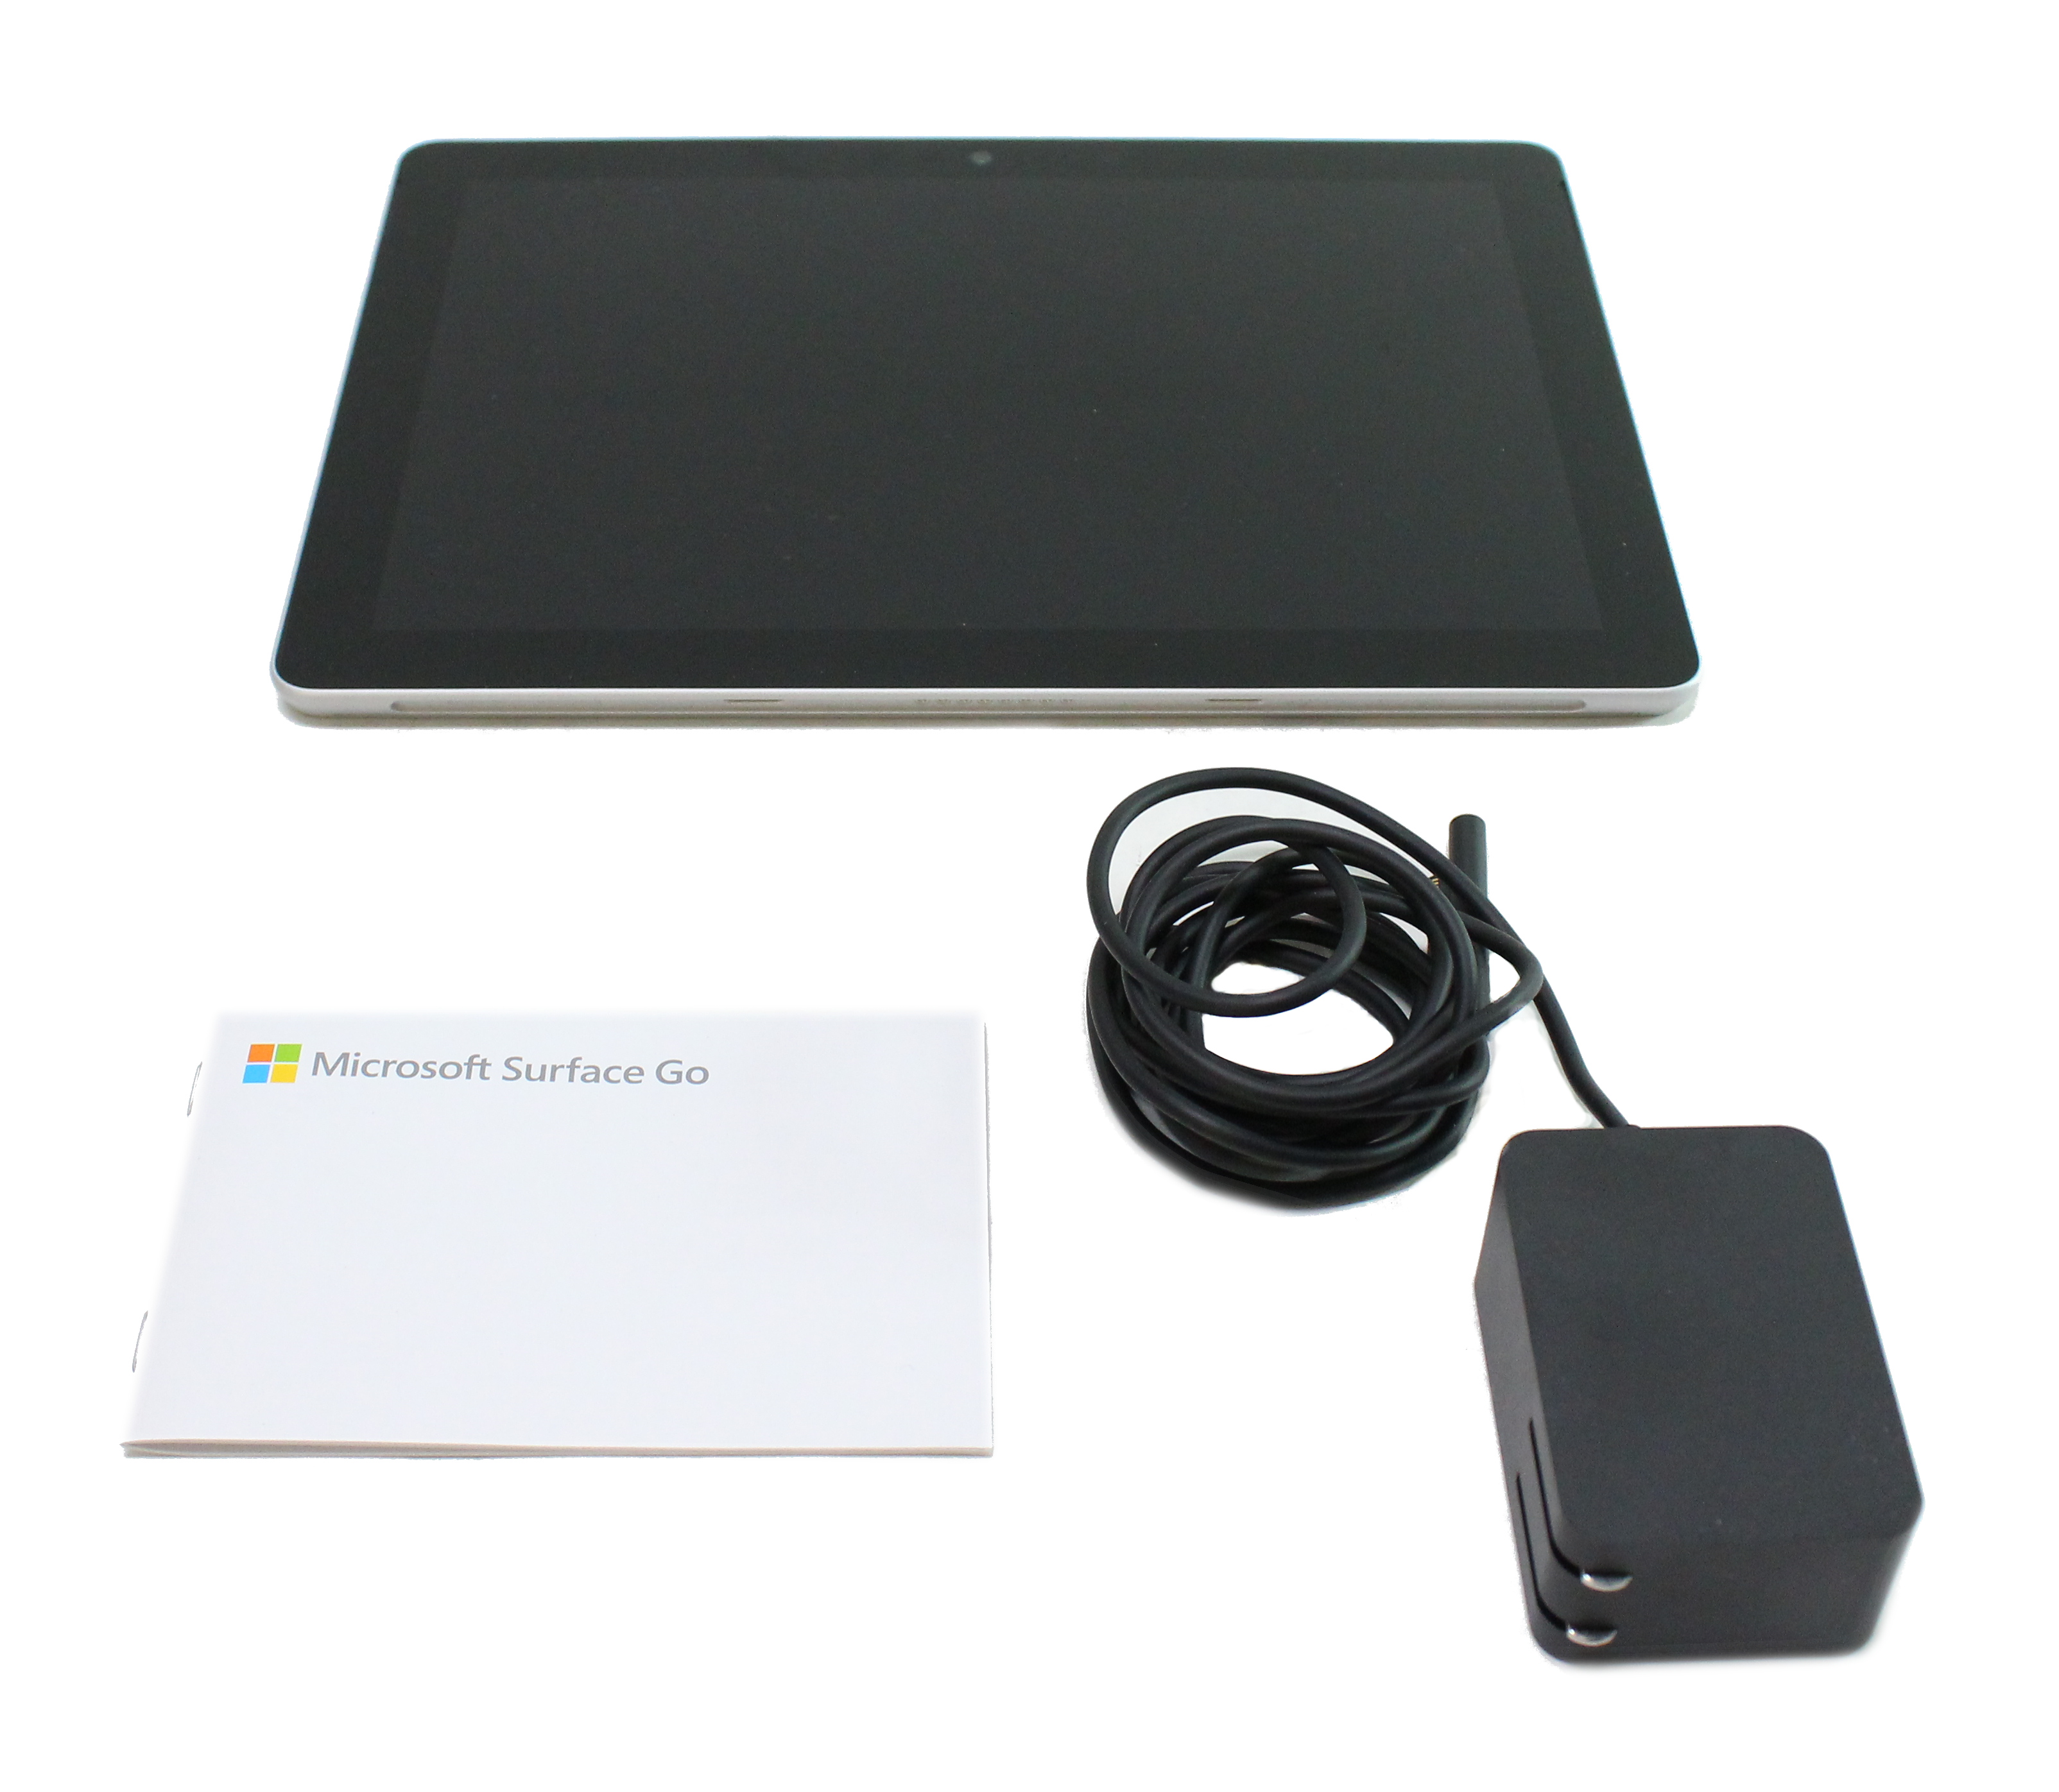 PTYTEC Computer Shop - Tablet Microsoft SurFace GO, 10 Multi-Touch,  Pentium 4415Y, 4GB, 64GB, Windows 10 S, Wi-Fi 5 y Bluetooth 4.1